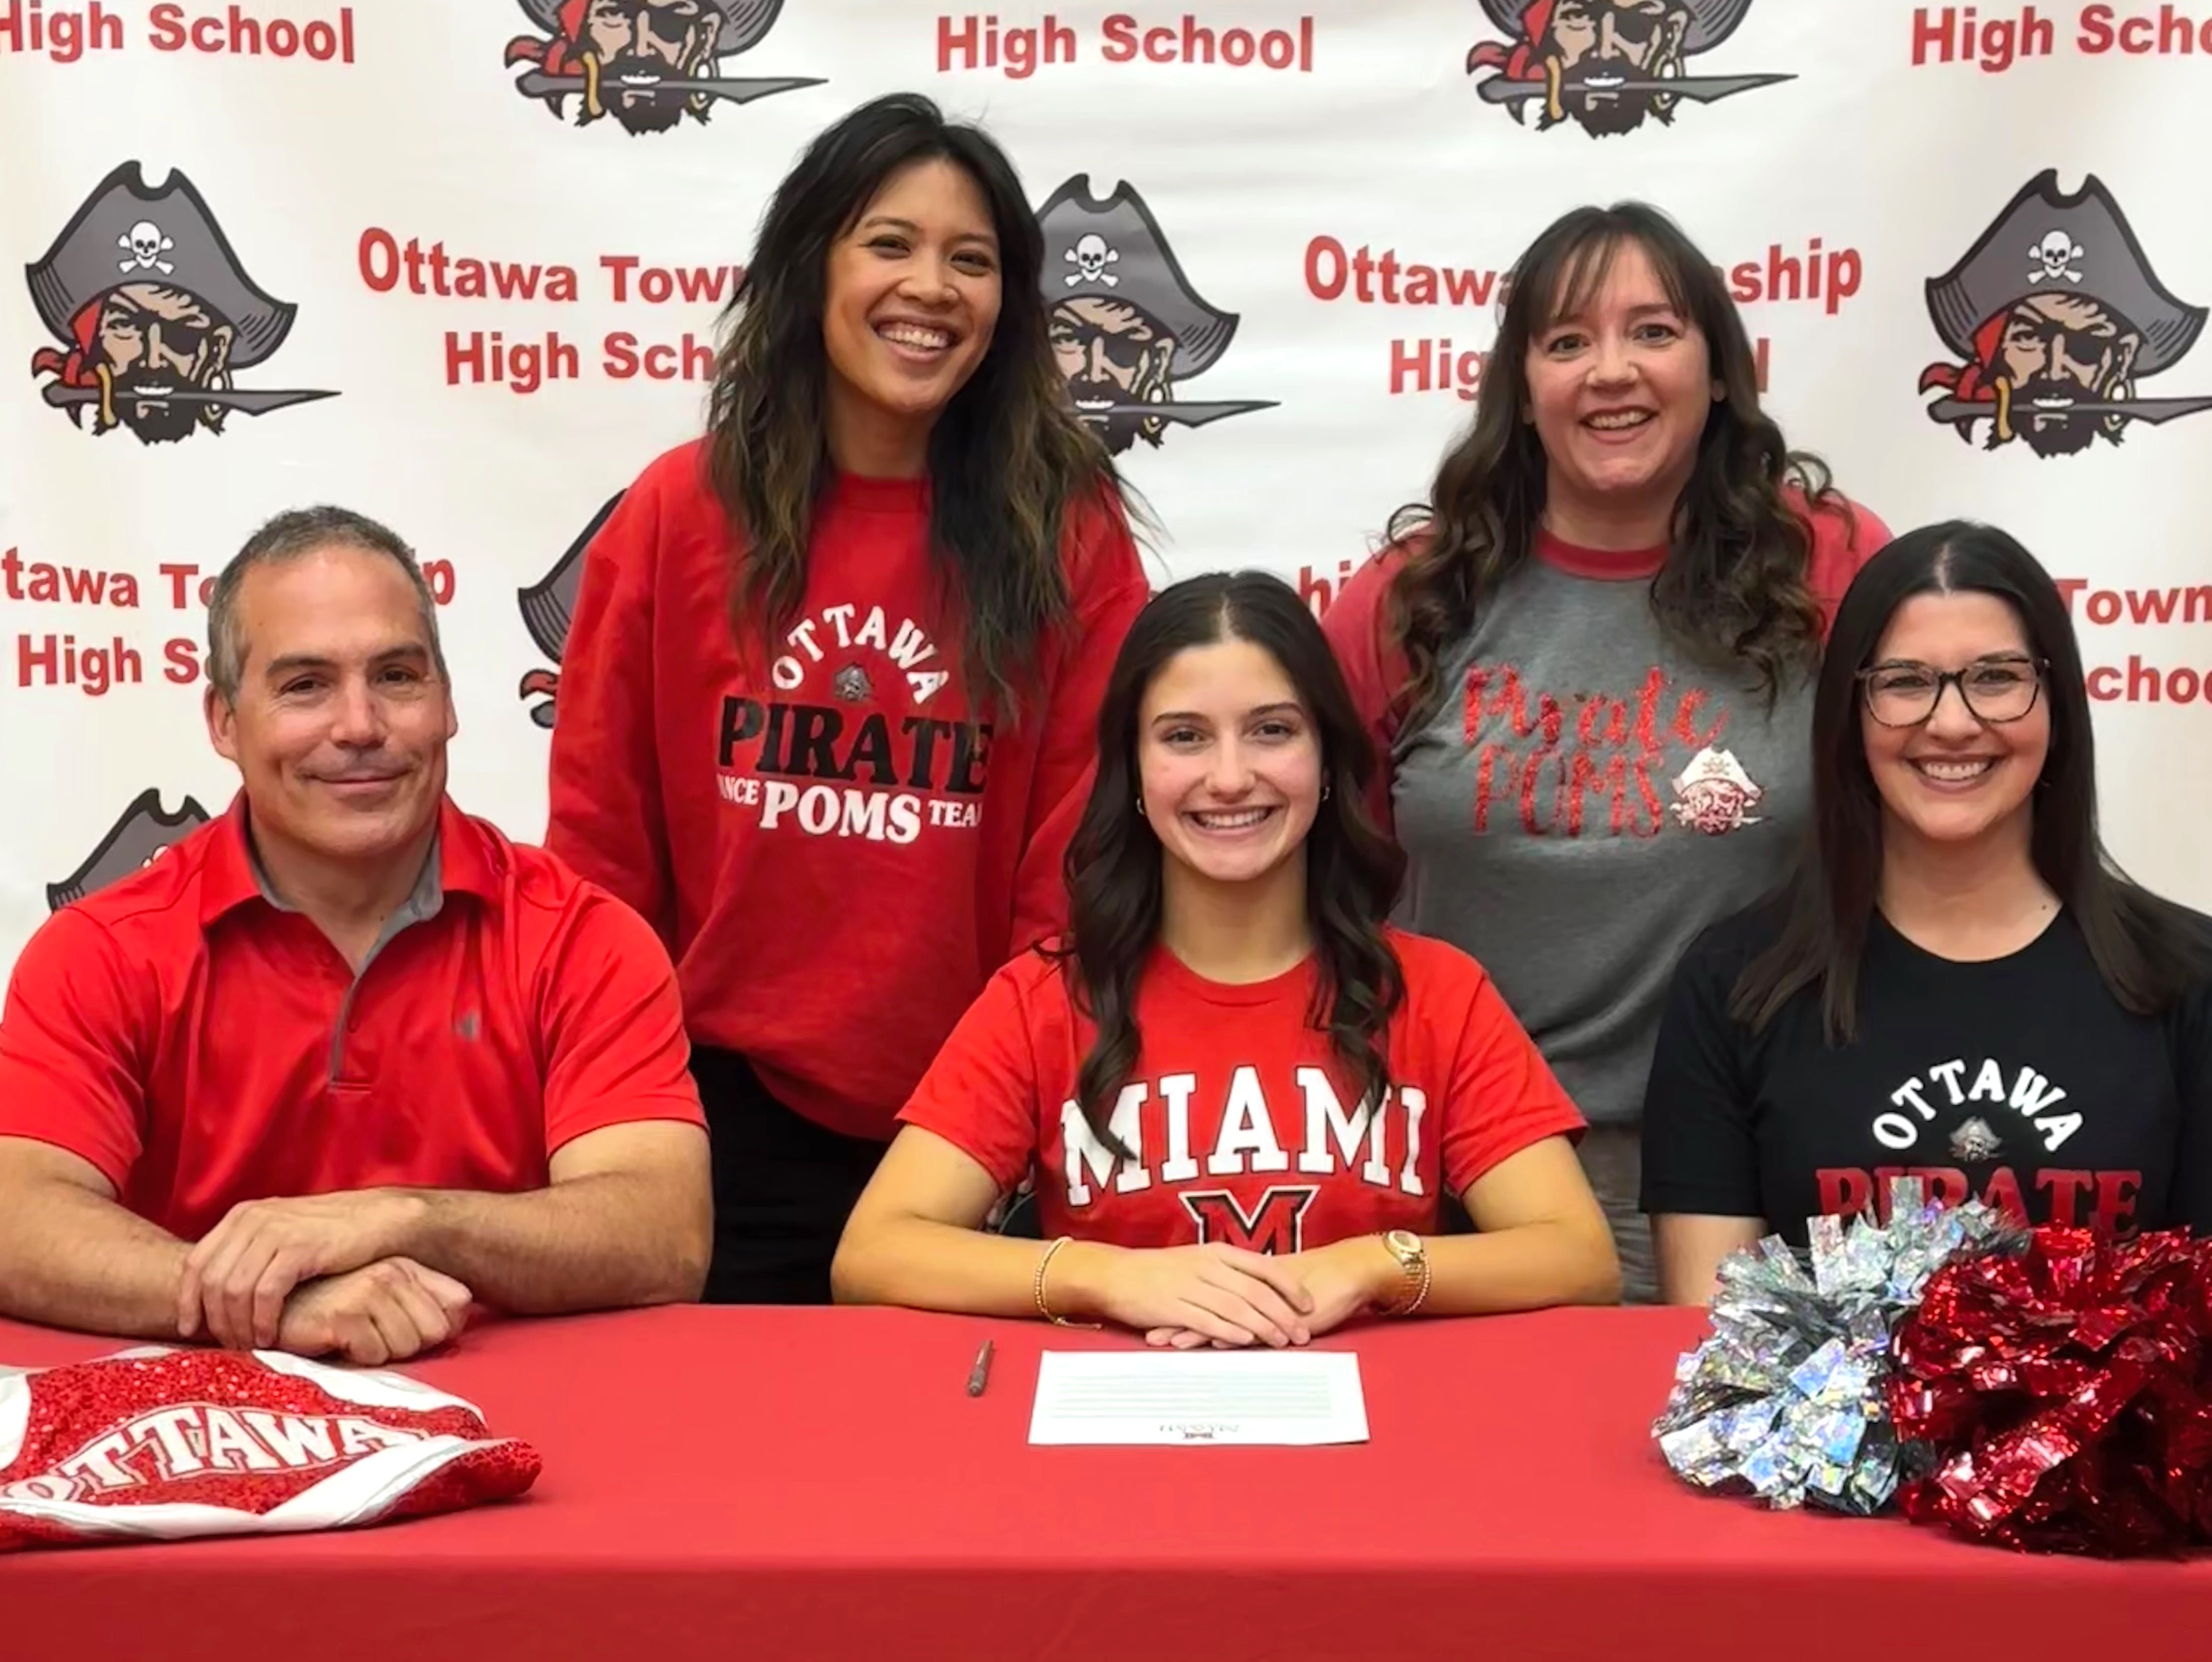 College signing: Ottawa’s Sophie Fernandez earns spot on Miami of Ohio dance team